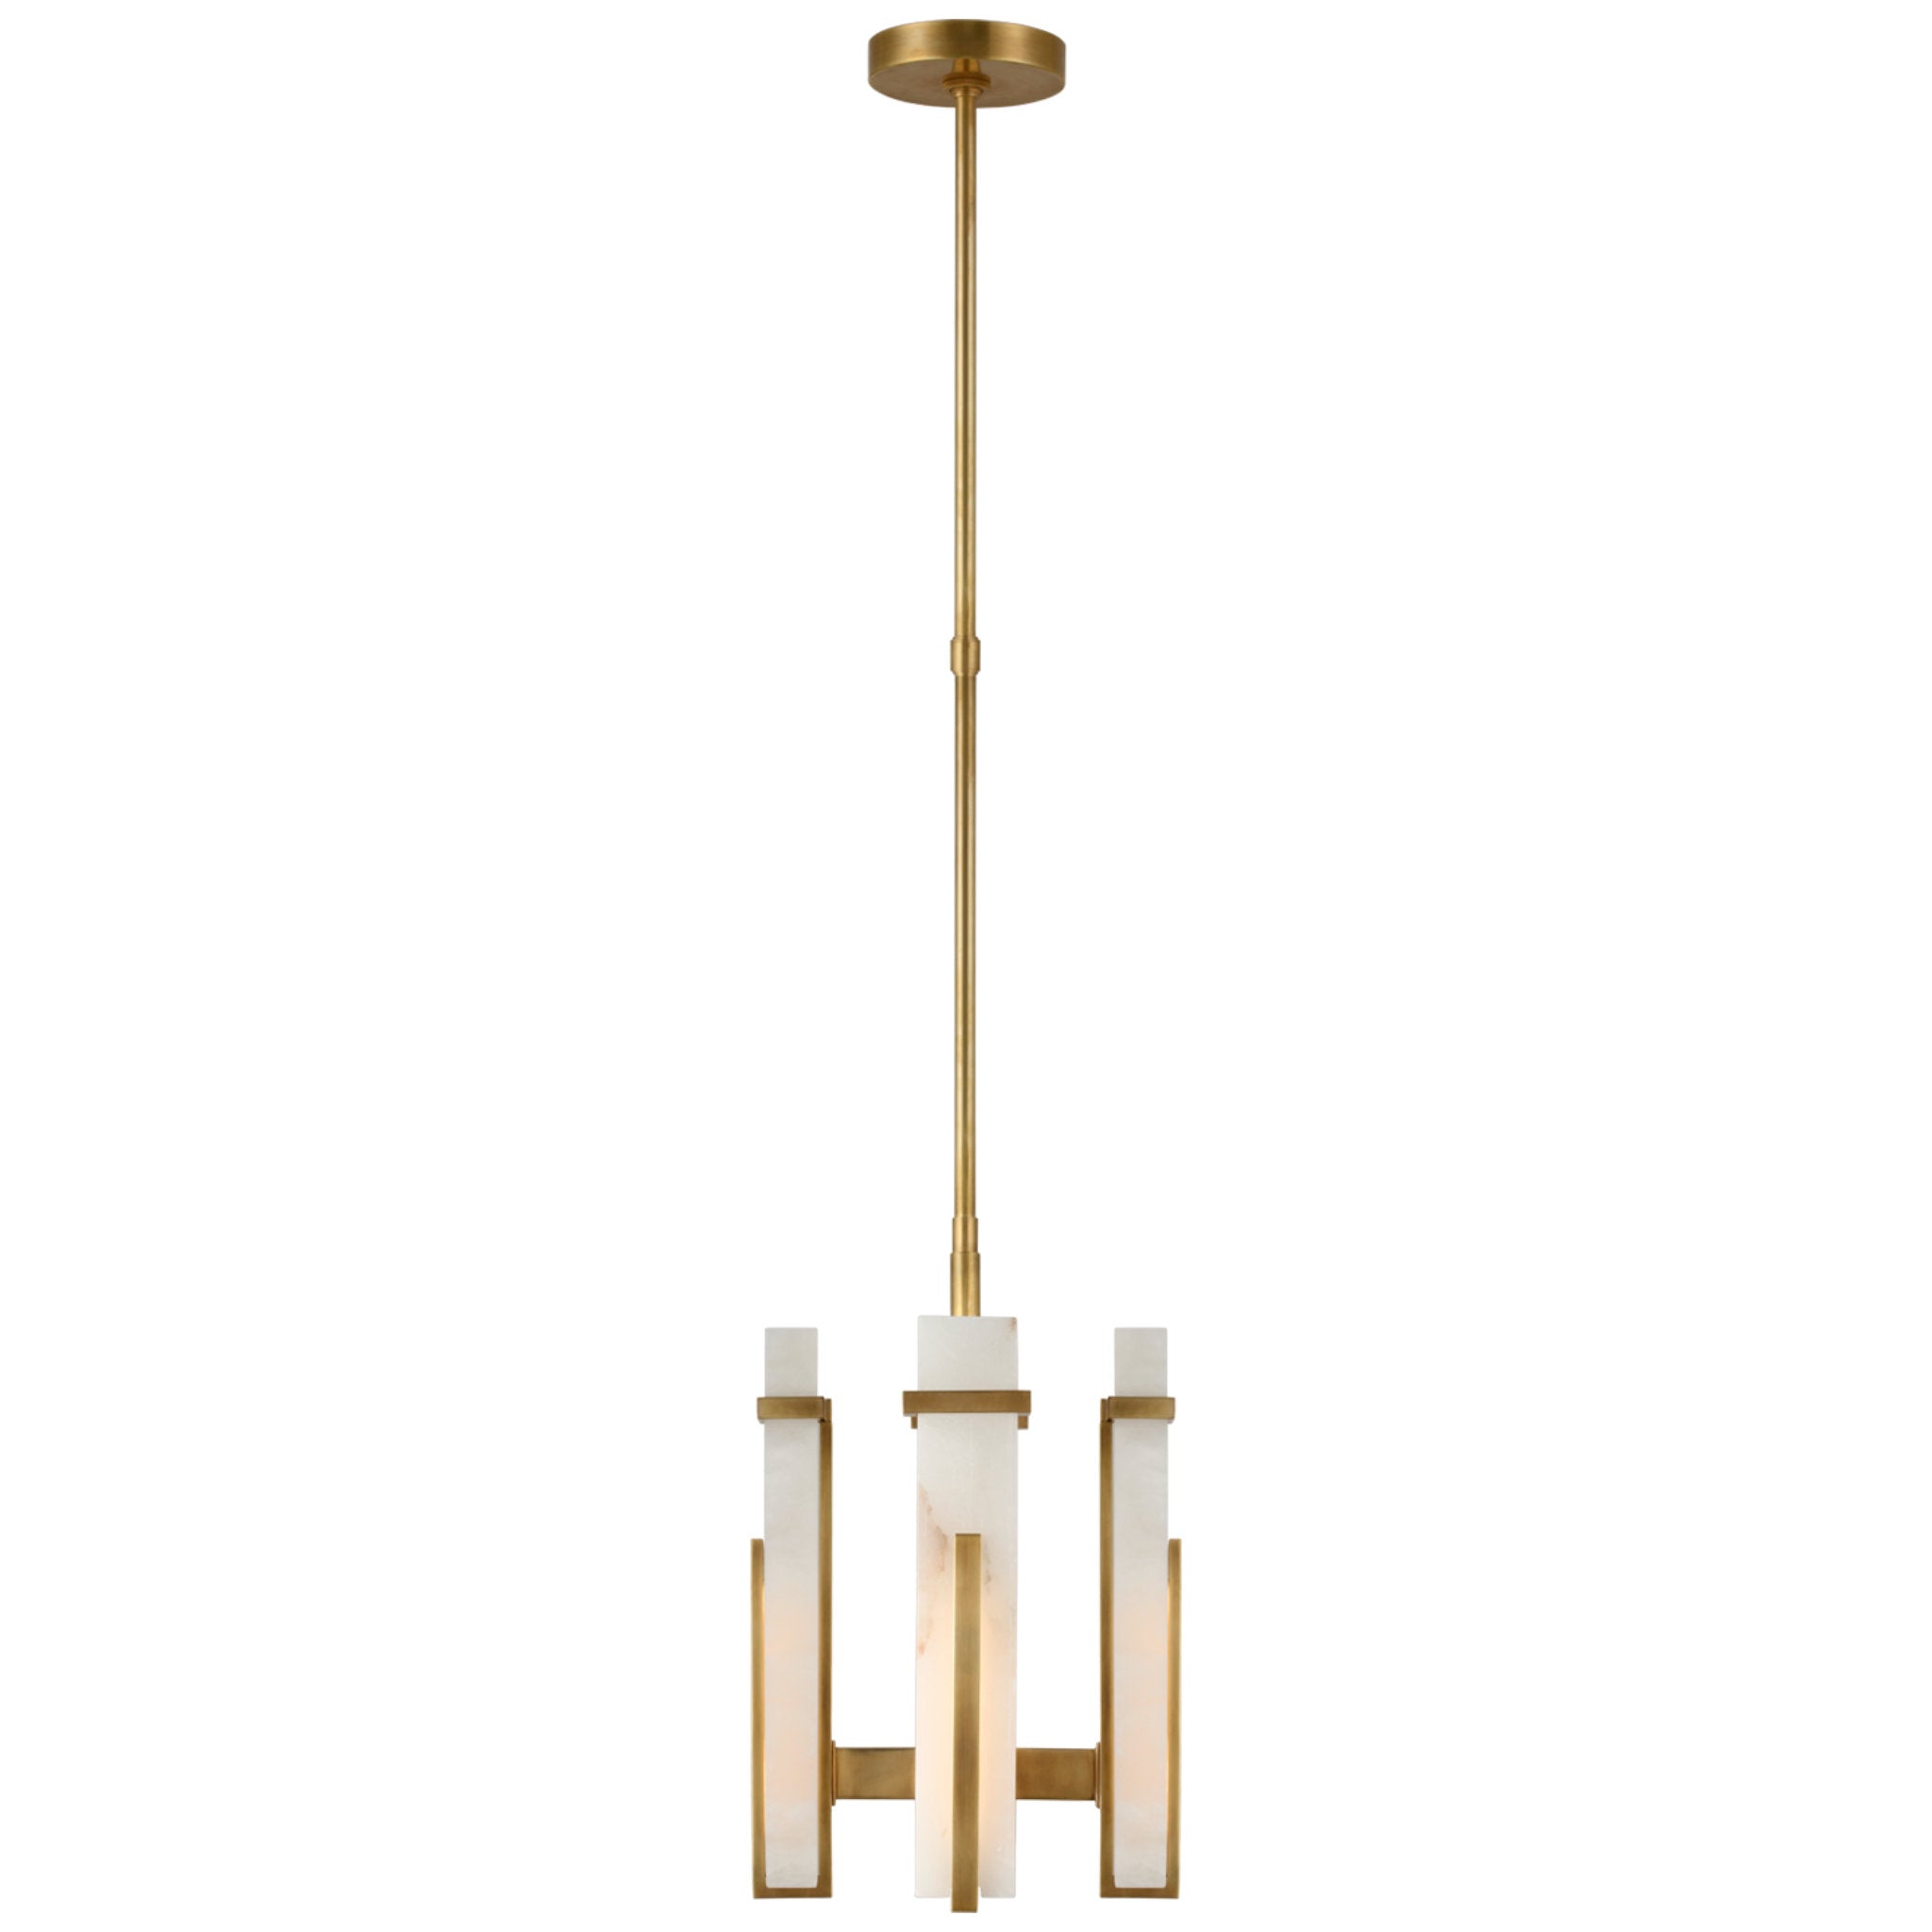 Ian K. Fowler Malik Small Chandelier in Hand-Rubbed Antique Brass with Alabaster